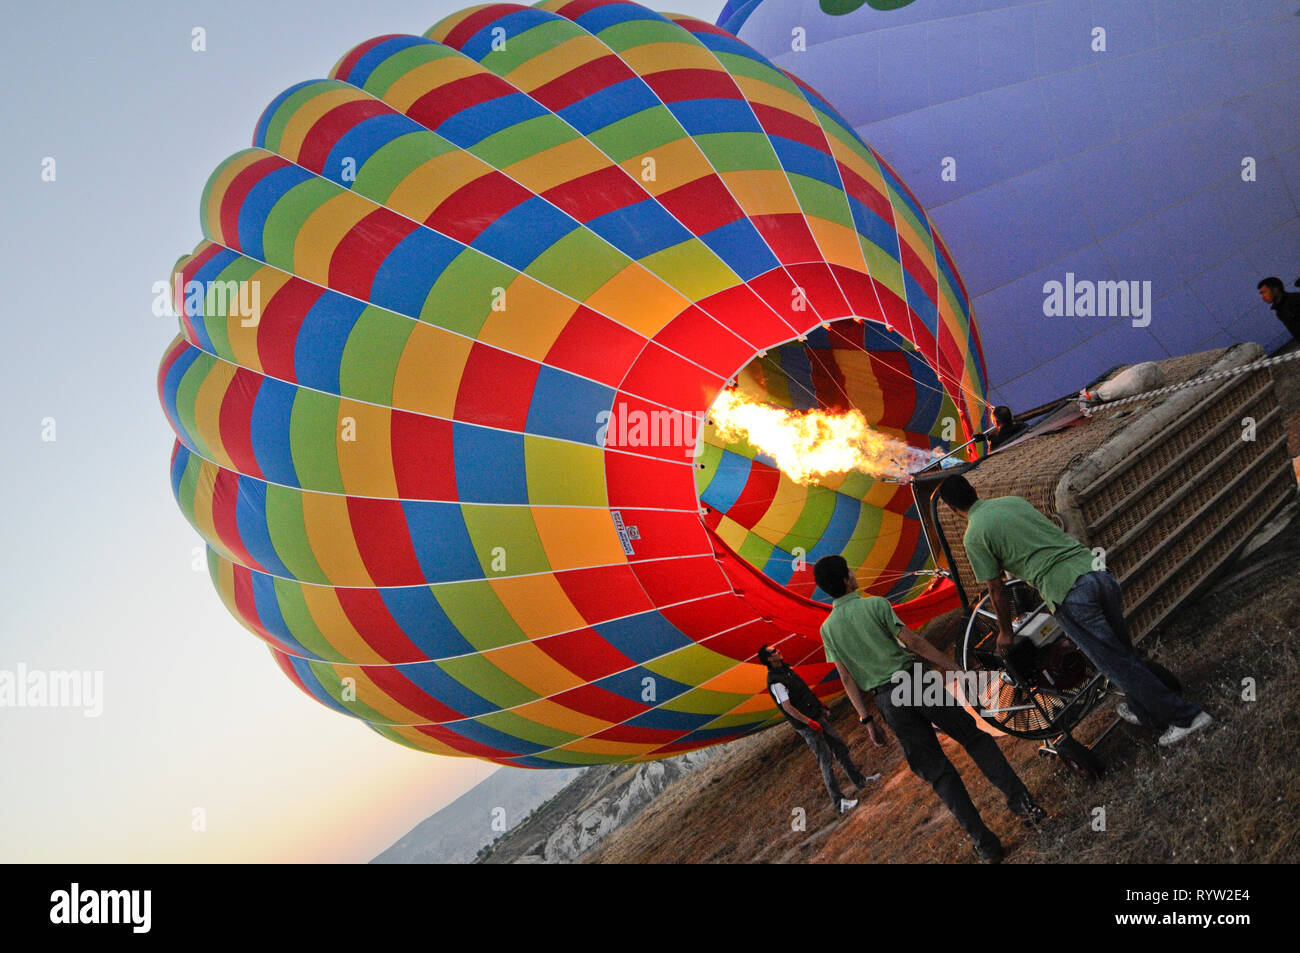 Hot air balloon being inflated by its propane burners prior to launch, Cappadocia, Turkey Stock Photo